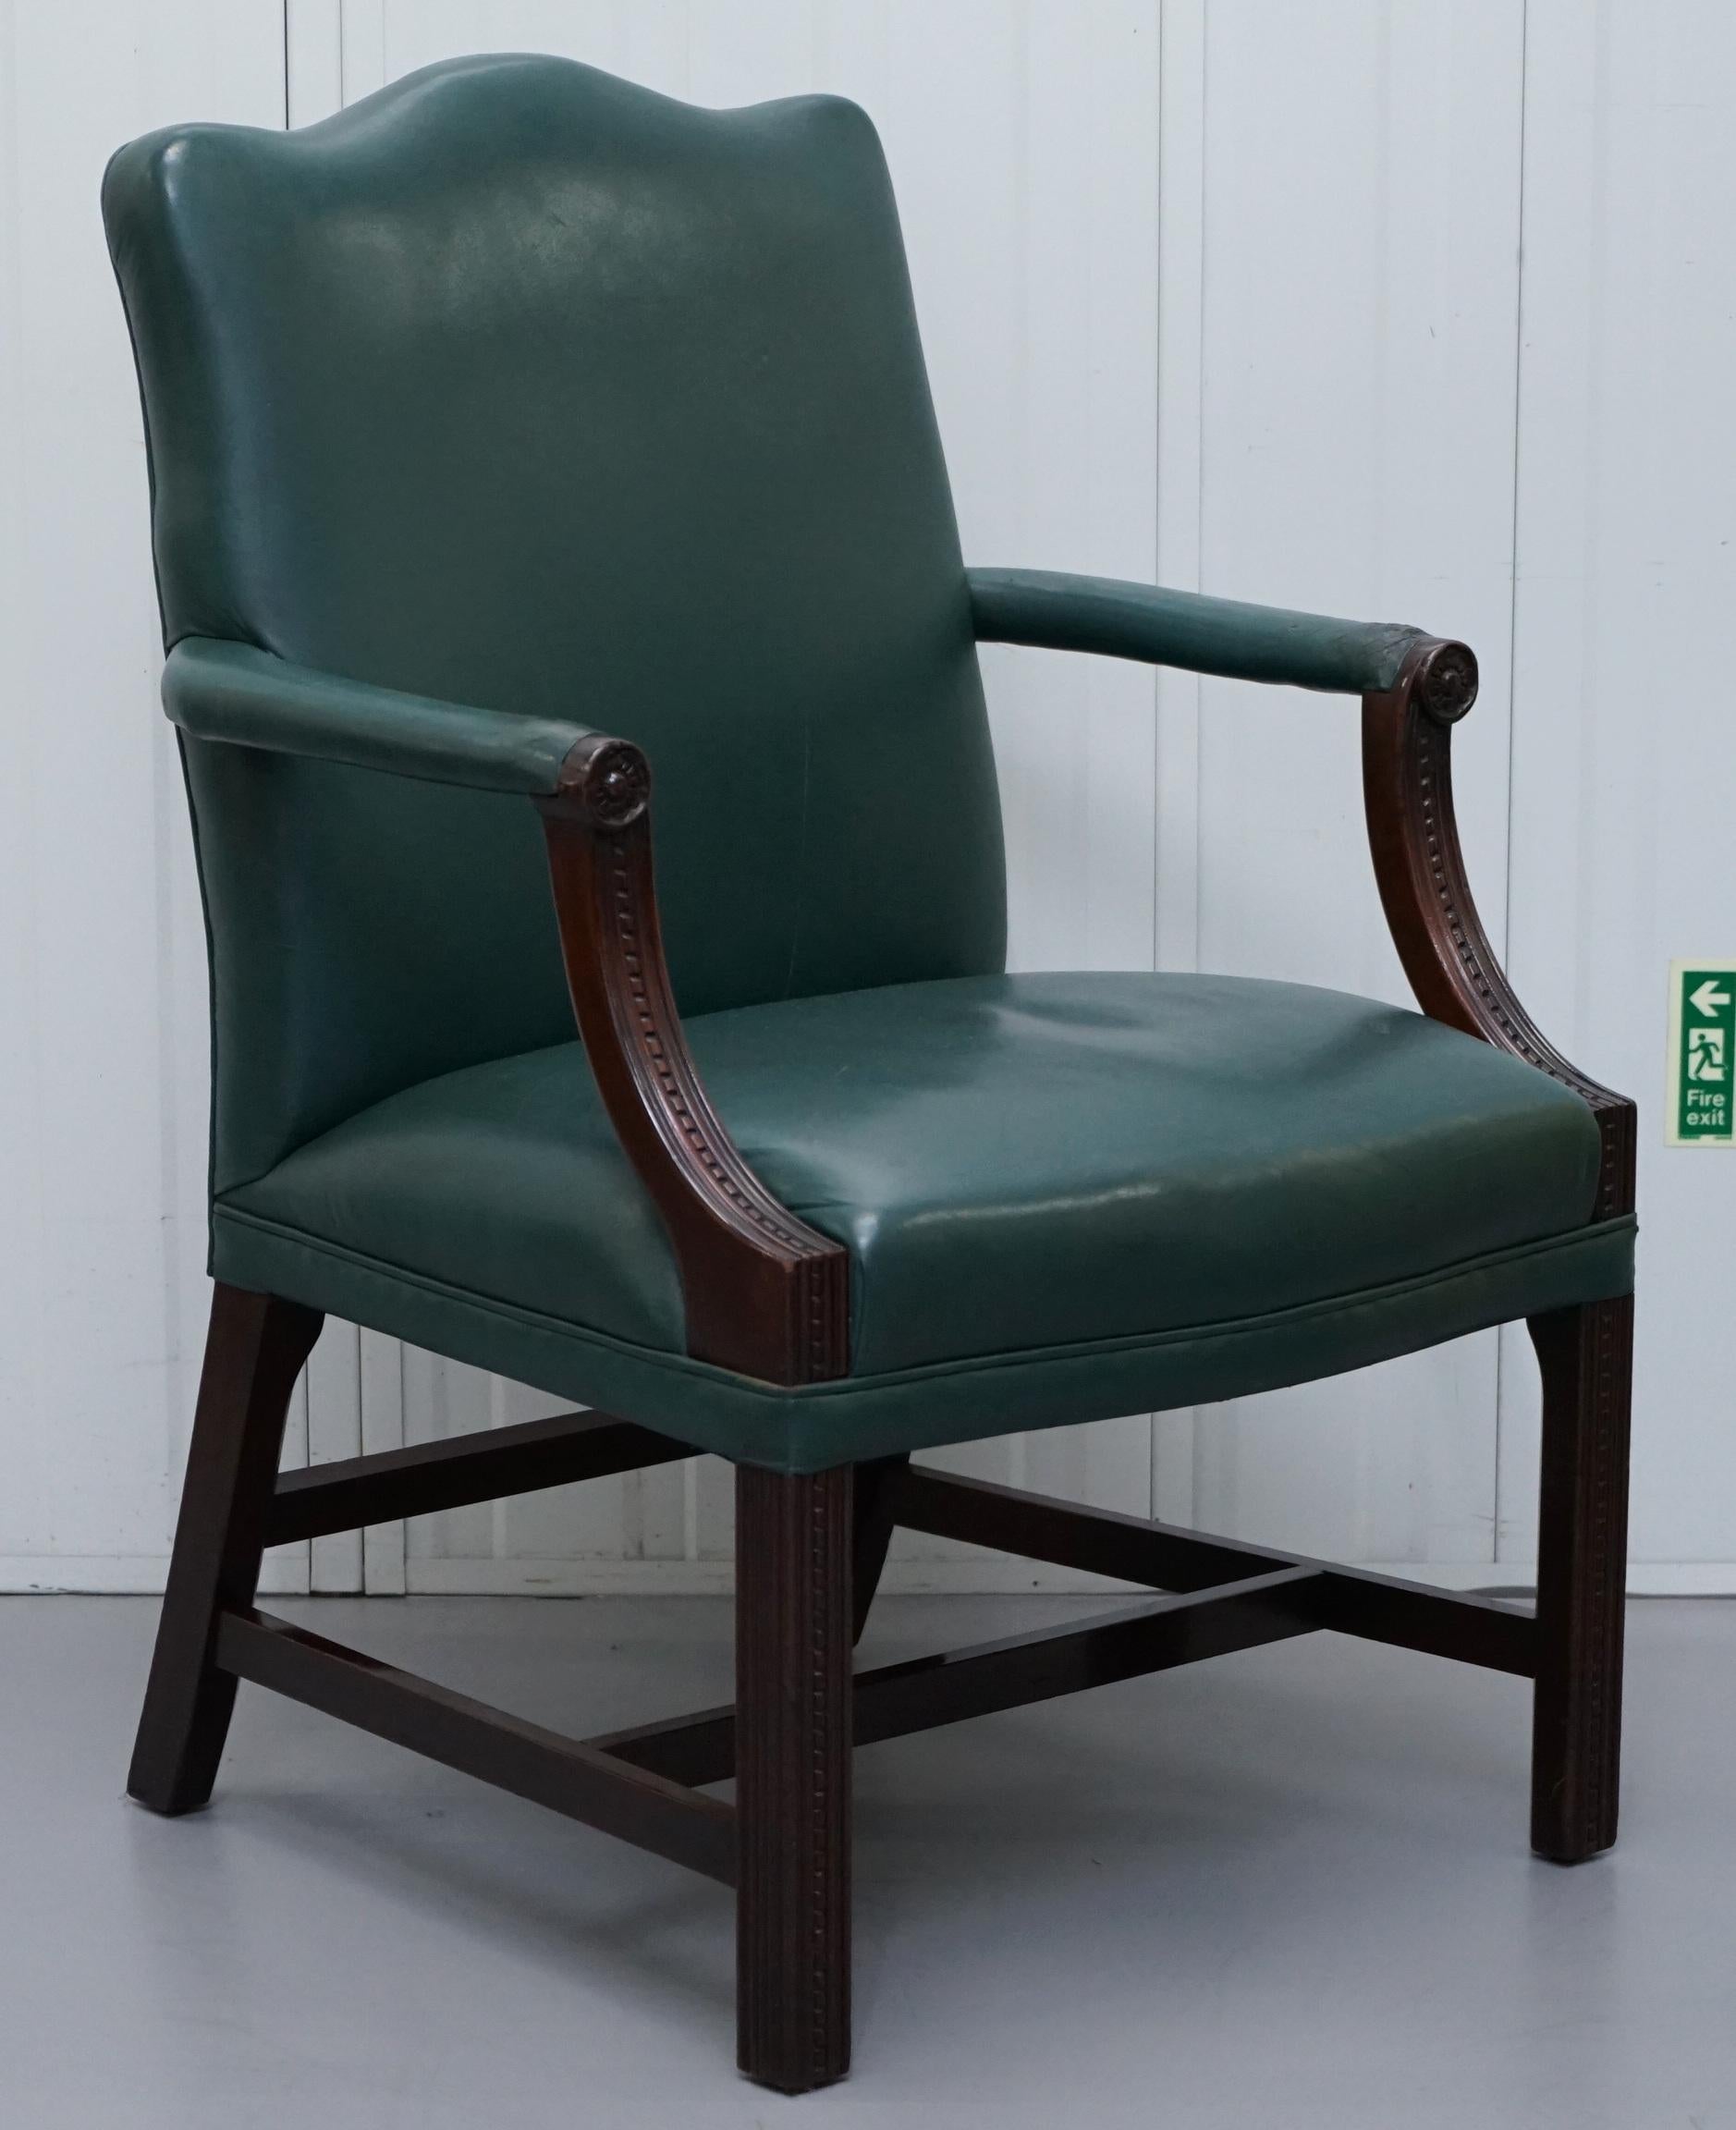 We are delighted to offer for sale this stunning set of six Gainsborough carver armchairs in Green leather with hand carved mahogany H-frames circa 1900

The chairs are a lovely find and in original condition throughout, most of them are perfect